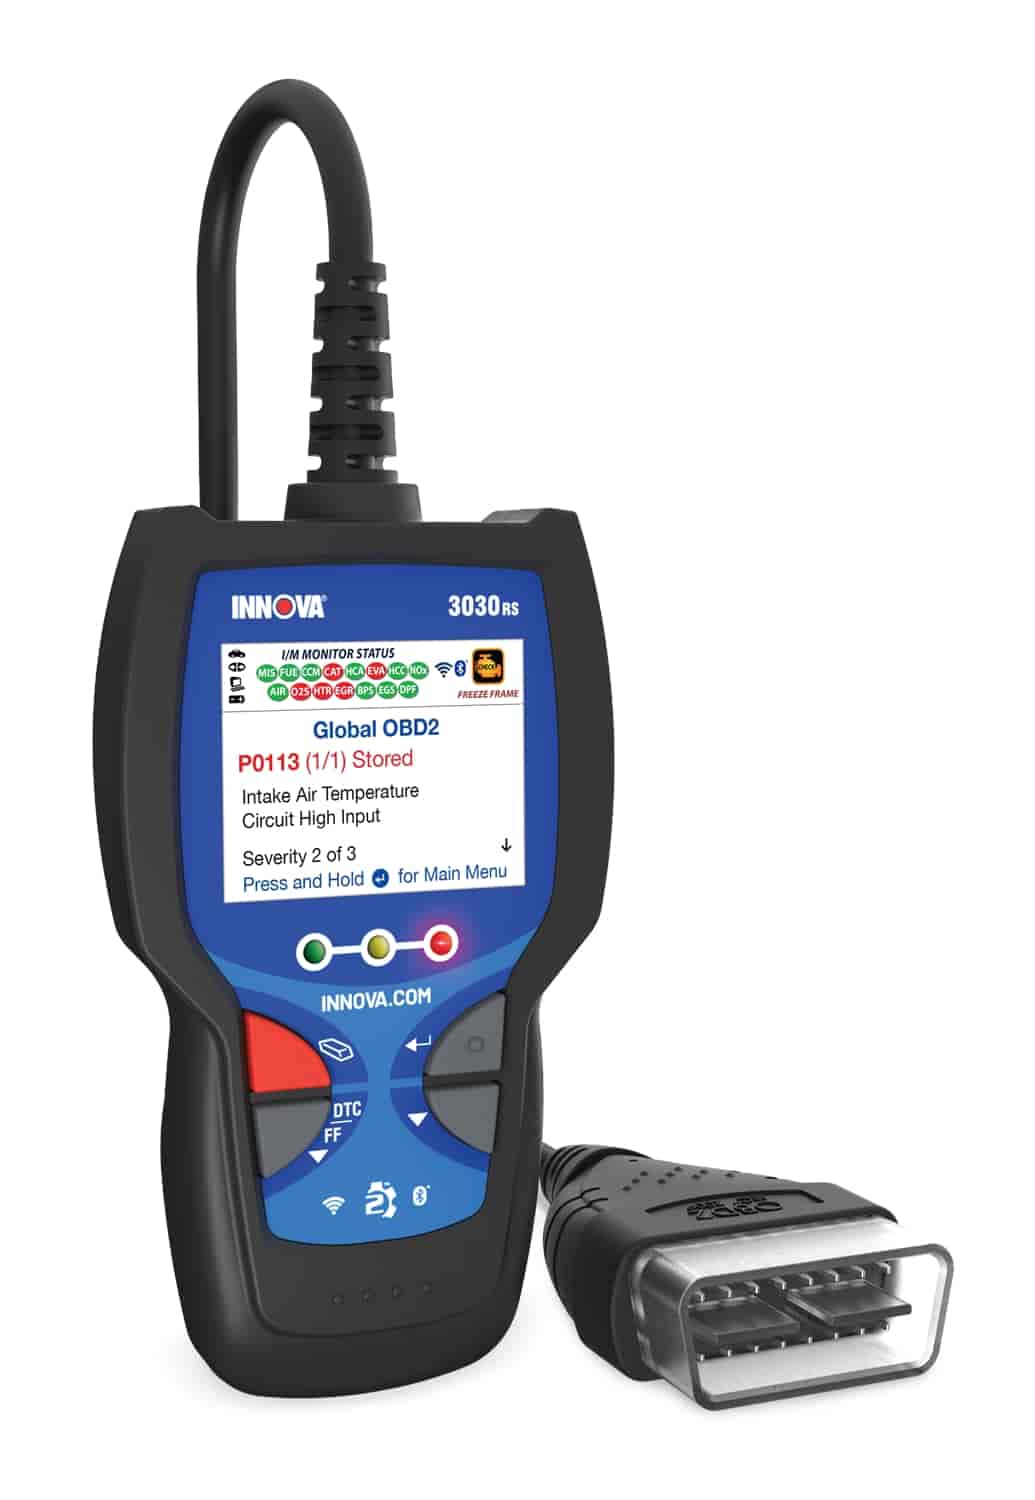 CAN/OBD-II Code Reader For 1996-Up Vehicles